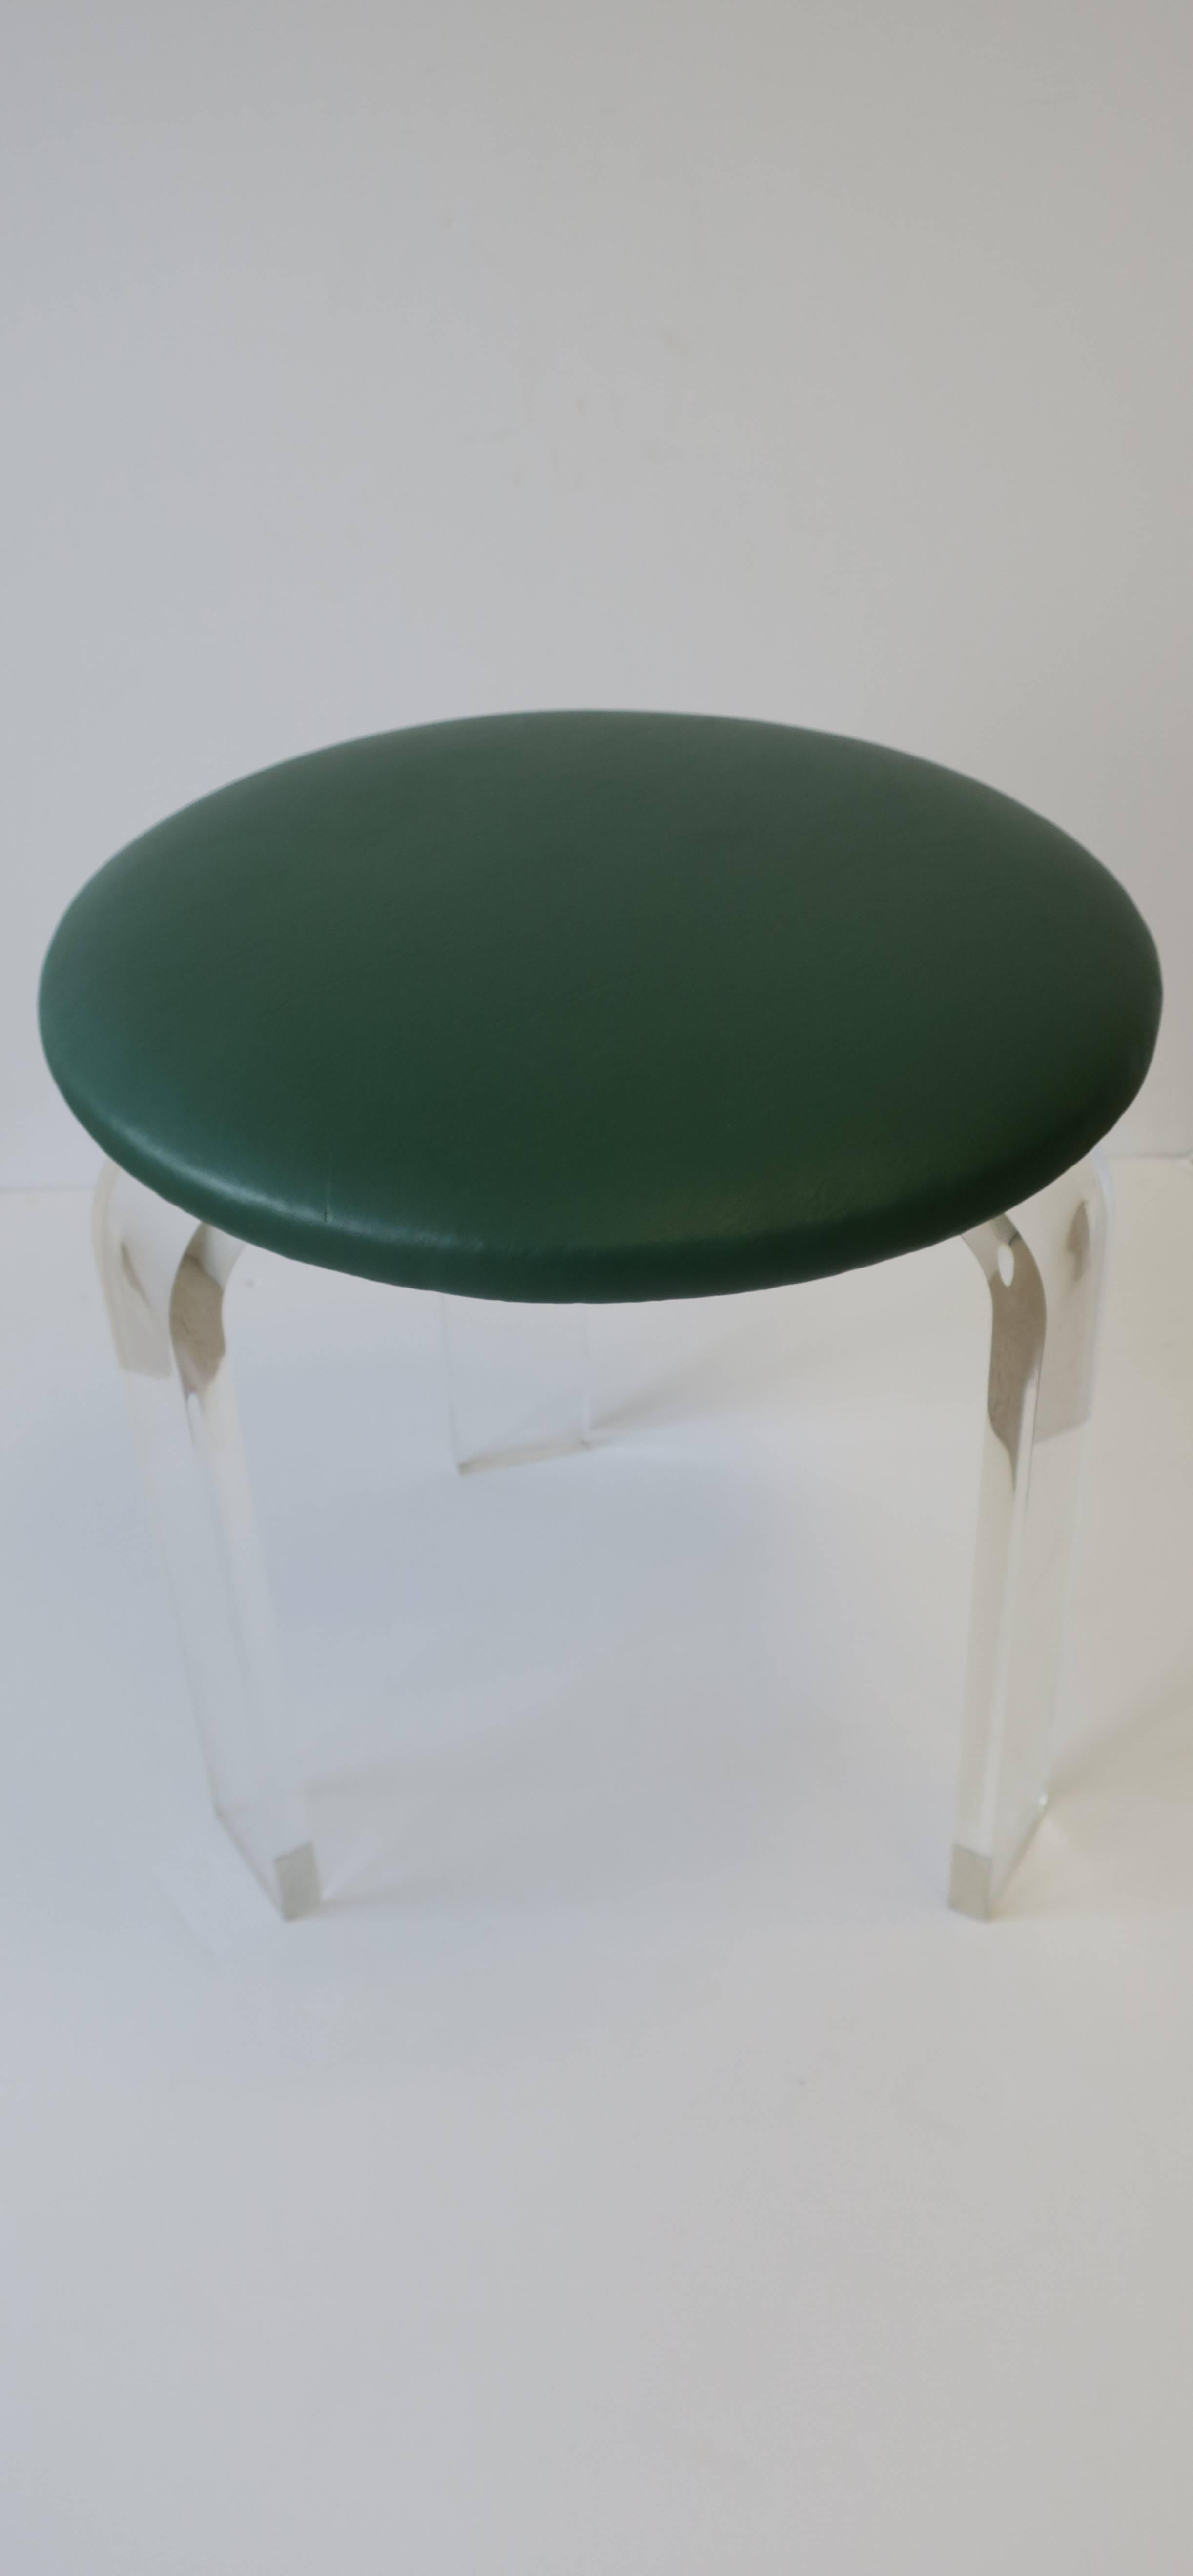 A Modern style Lucite stool or vanity chair with a 'Kelly' green faux leather upholstered seat cushion. 

Measures 16